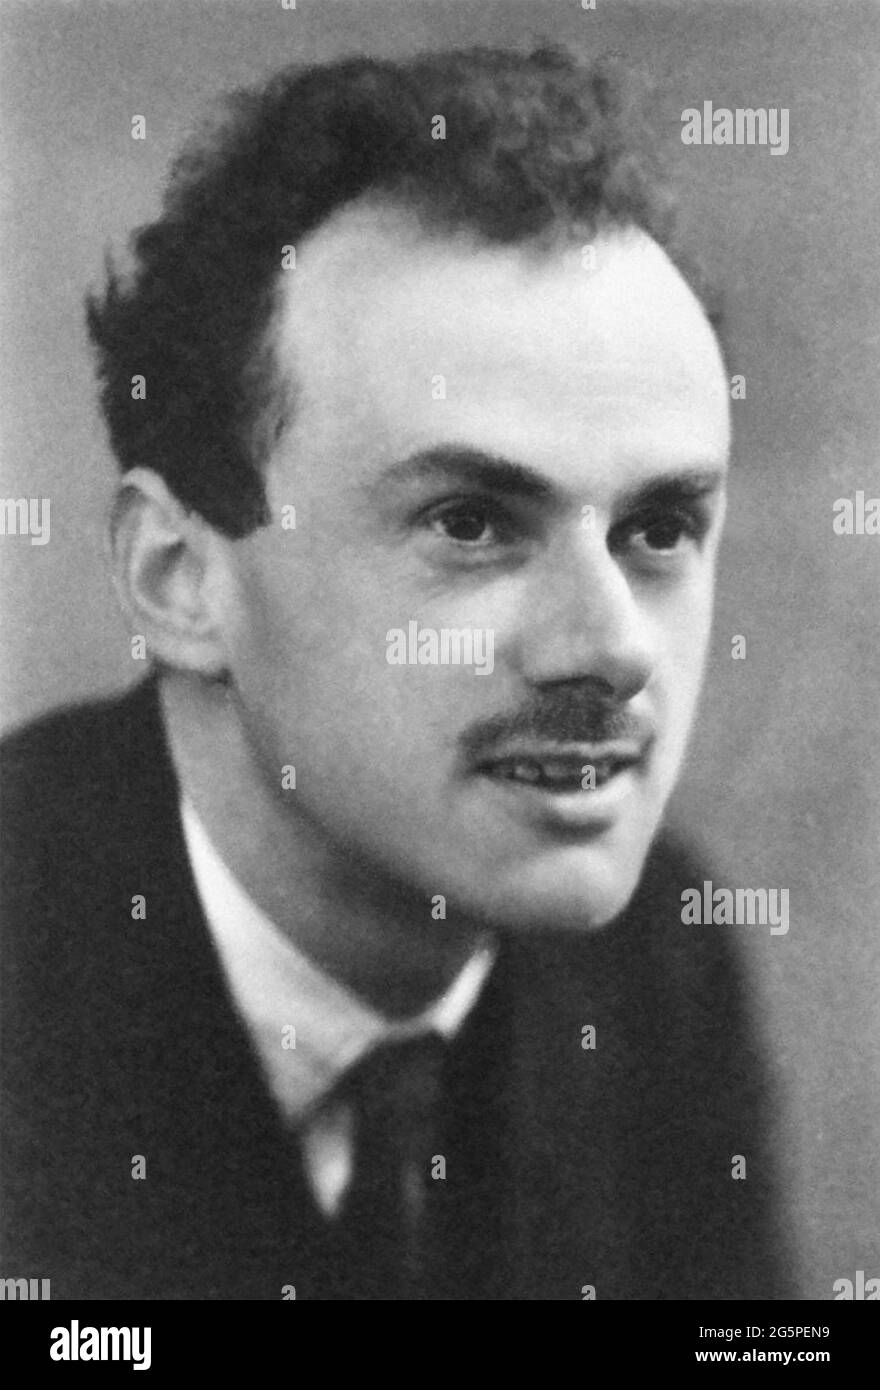 PAUL DIRAC (1902-1984) English theoretical physicist in 1933 when he shared the Nobel Prize in Physics with Erwin Schrödiger Stock Photo